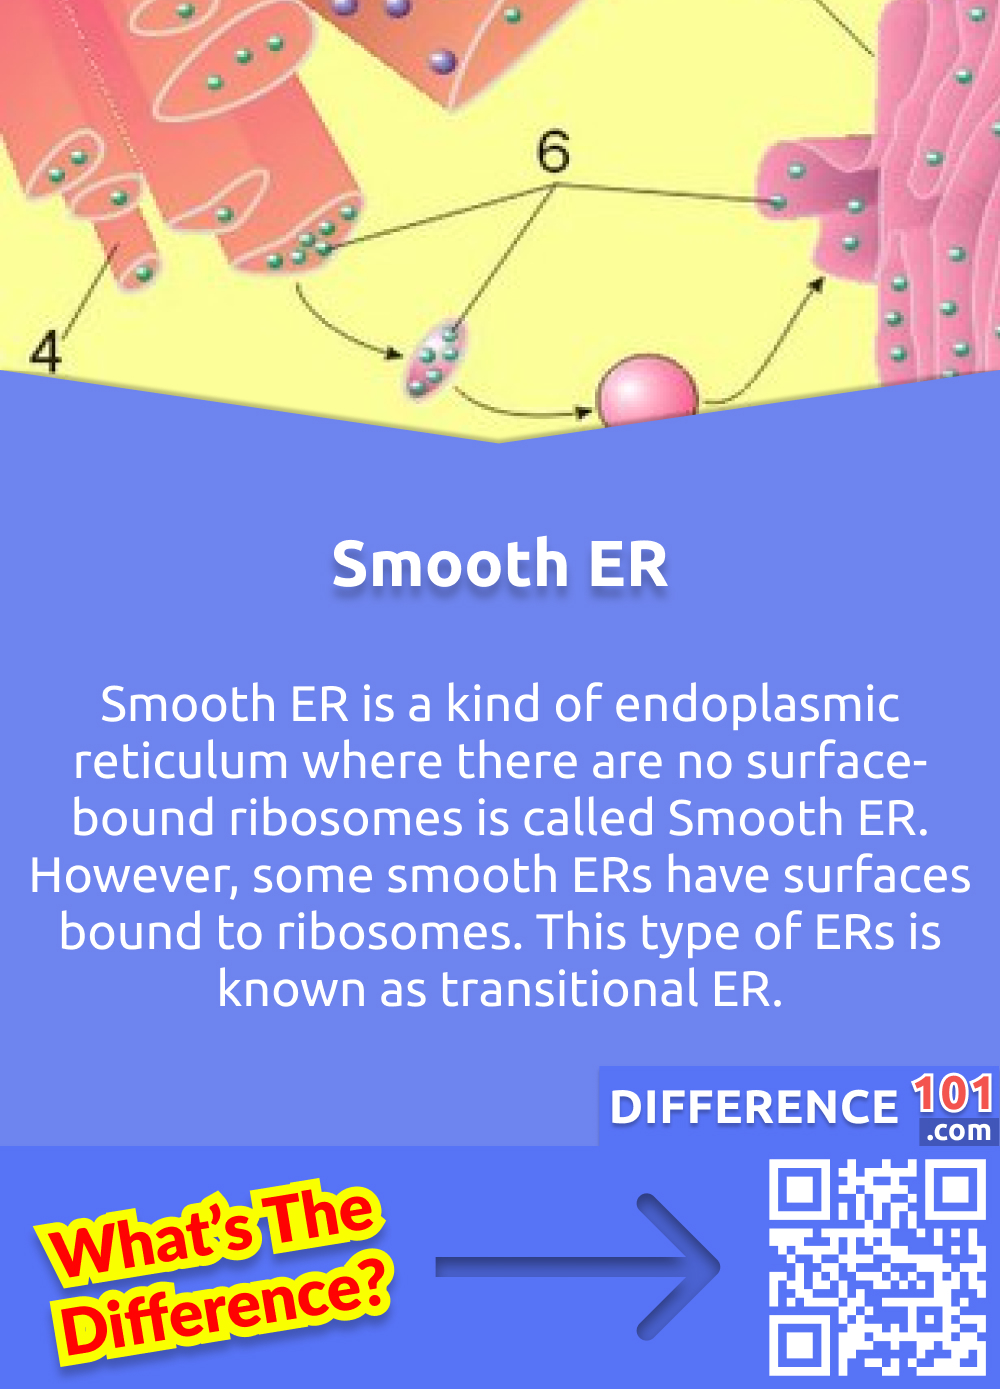 What Is Smooth Endoplasmic Reticulum? Smooth ER is a kind of endoplasmic reticulum where there are no surface-bound ribosomes is called Smooth ER. However, some smooth ERs have surfaces bound to ribosomes. This type of ERs is known as transitional ER.